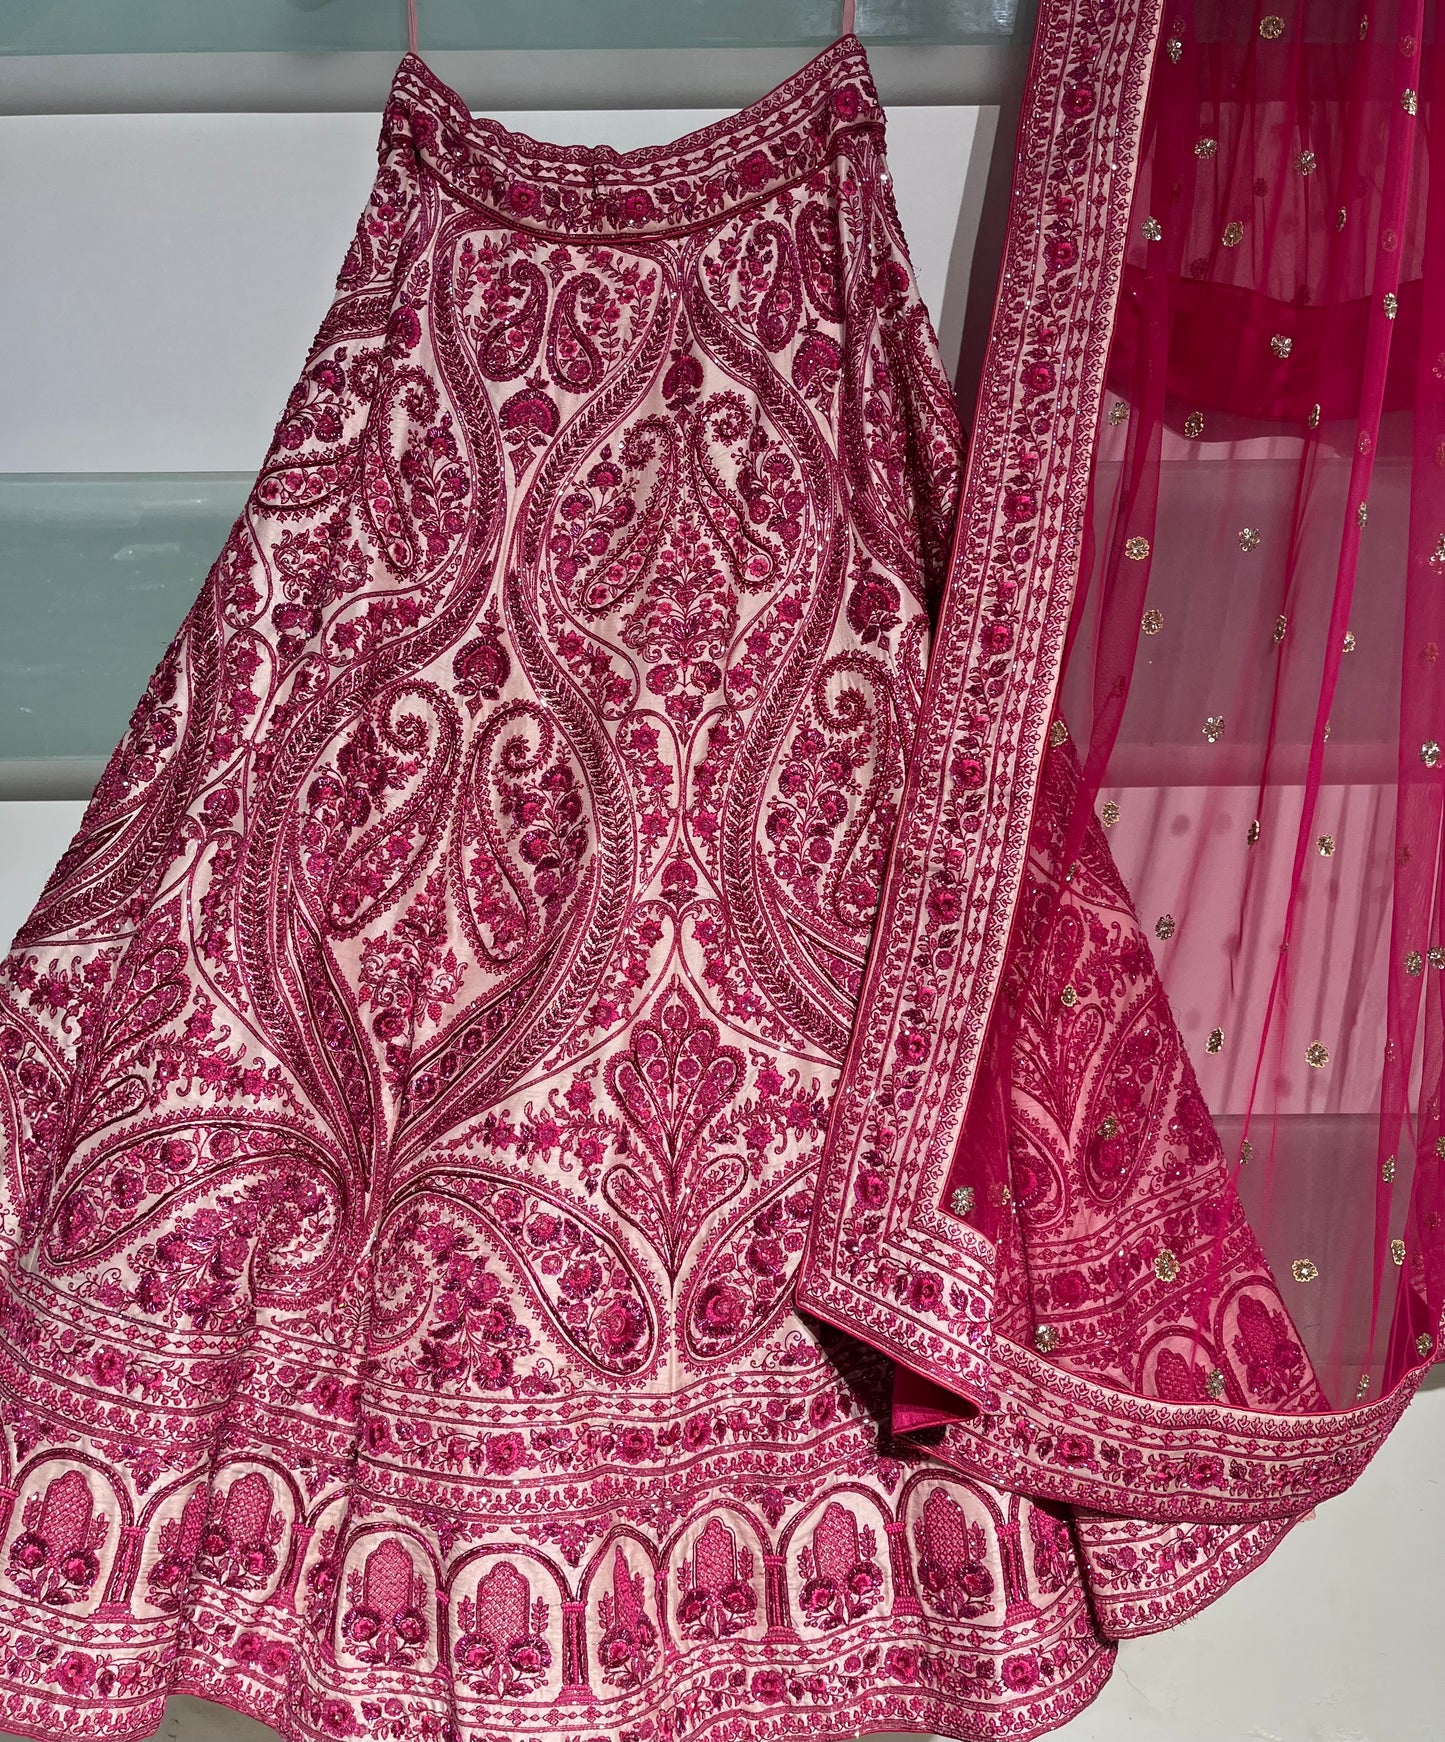 BRIDAL PINK COLOUR SILK HAND EMBROIDERED LEHENGA WITH NET DUPATTA EMBELLISHED WITH ZARDOZI WORK & UNSTITCHED BLOUSE